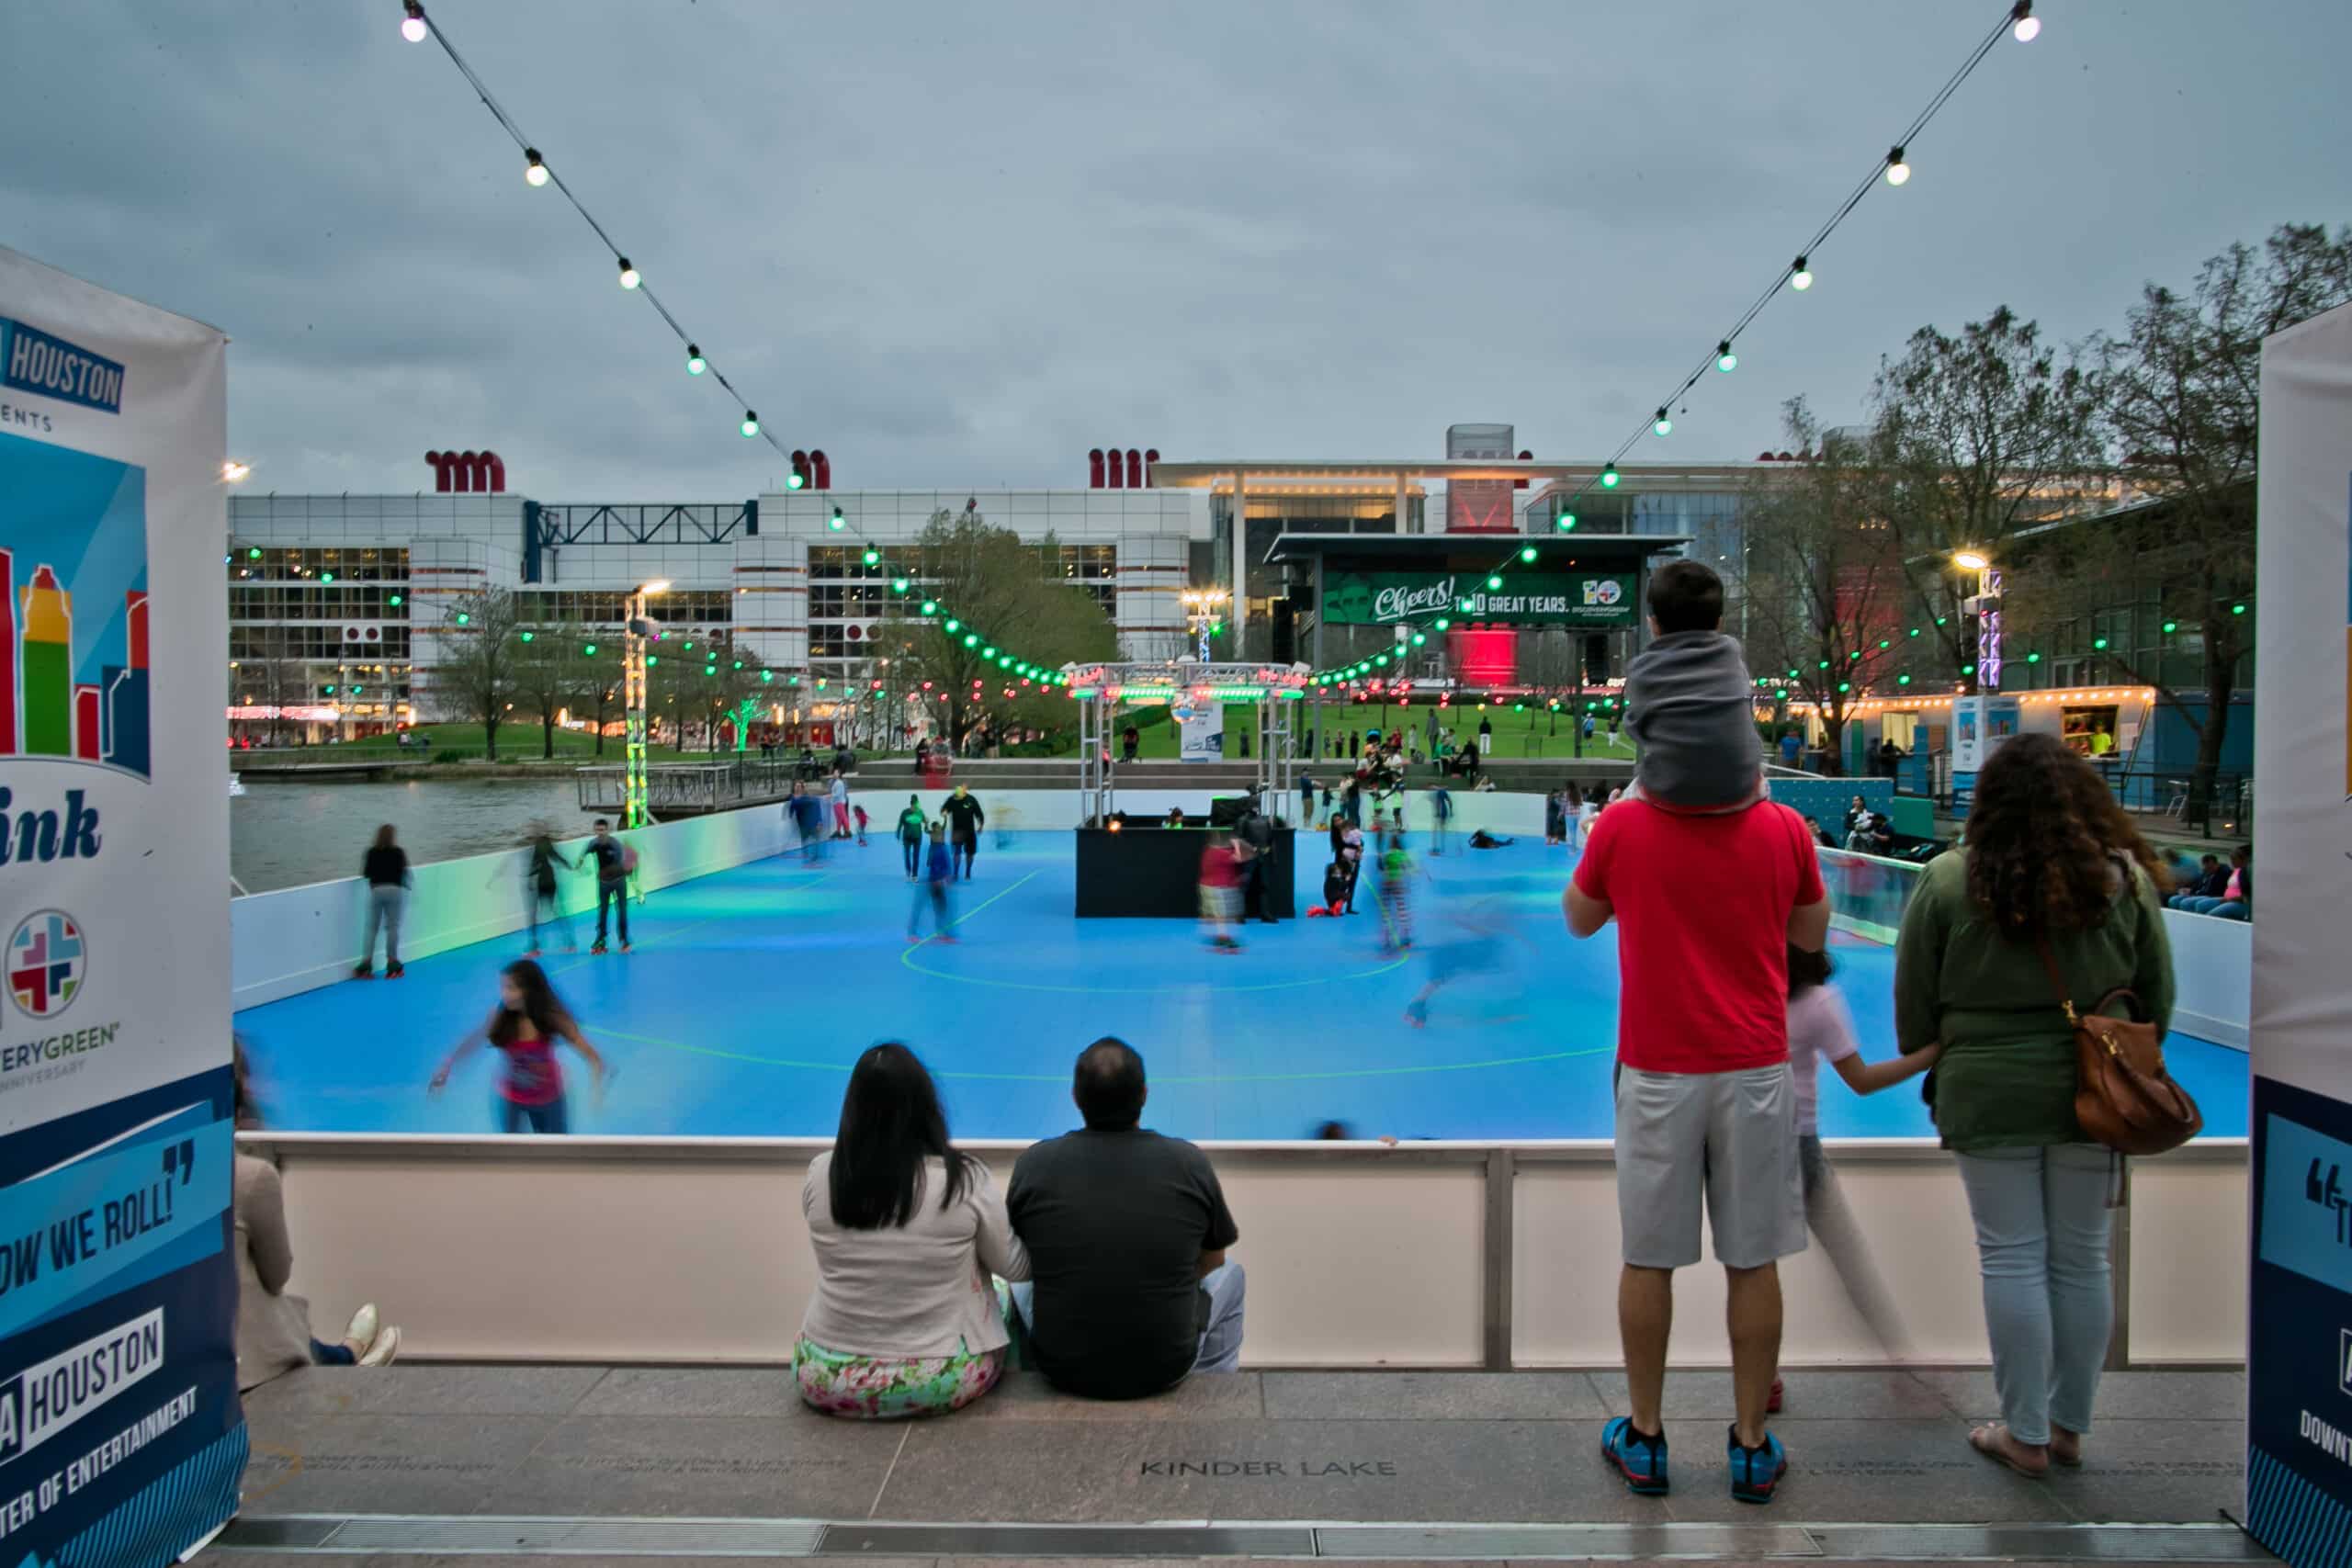 A couple and a family gazing at skaters on the roller rink in Downtown Houston